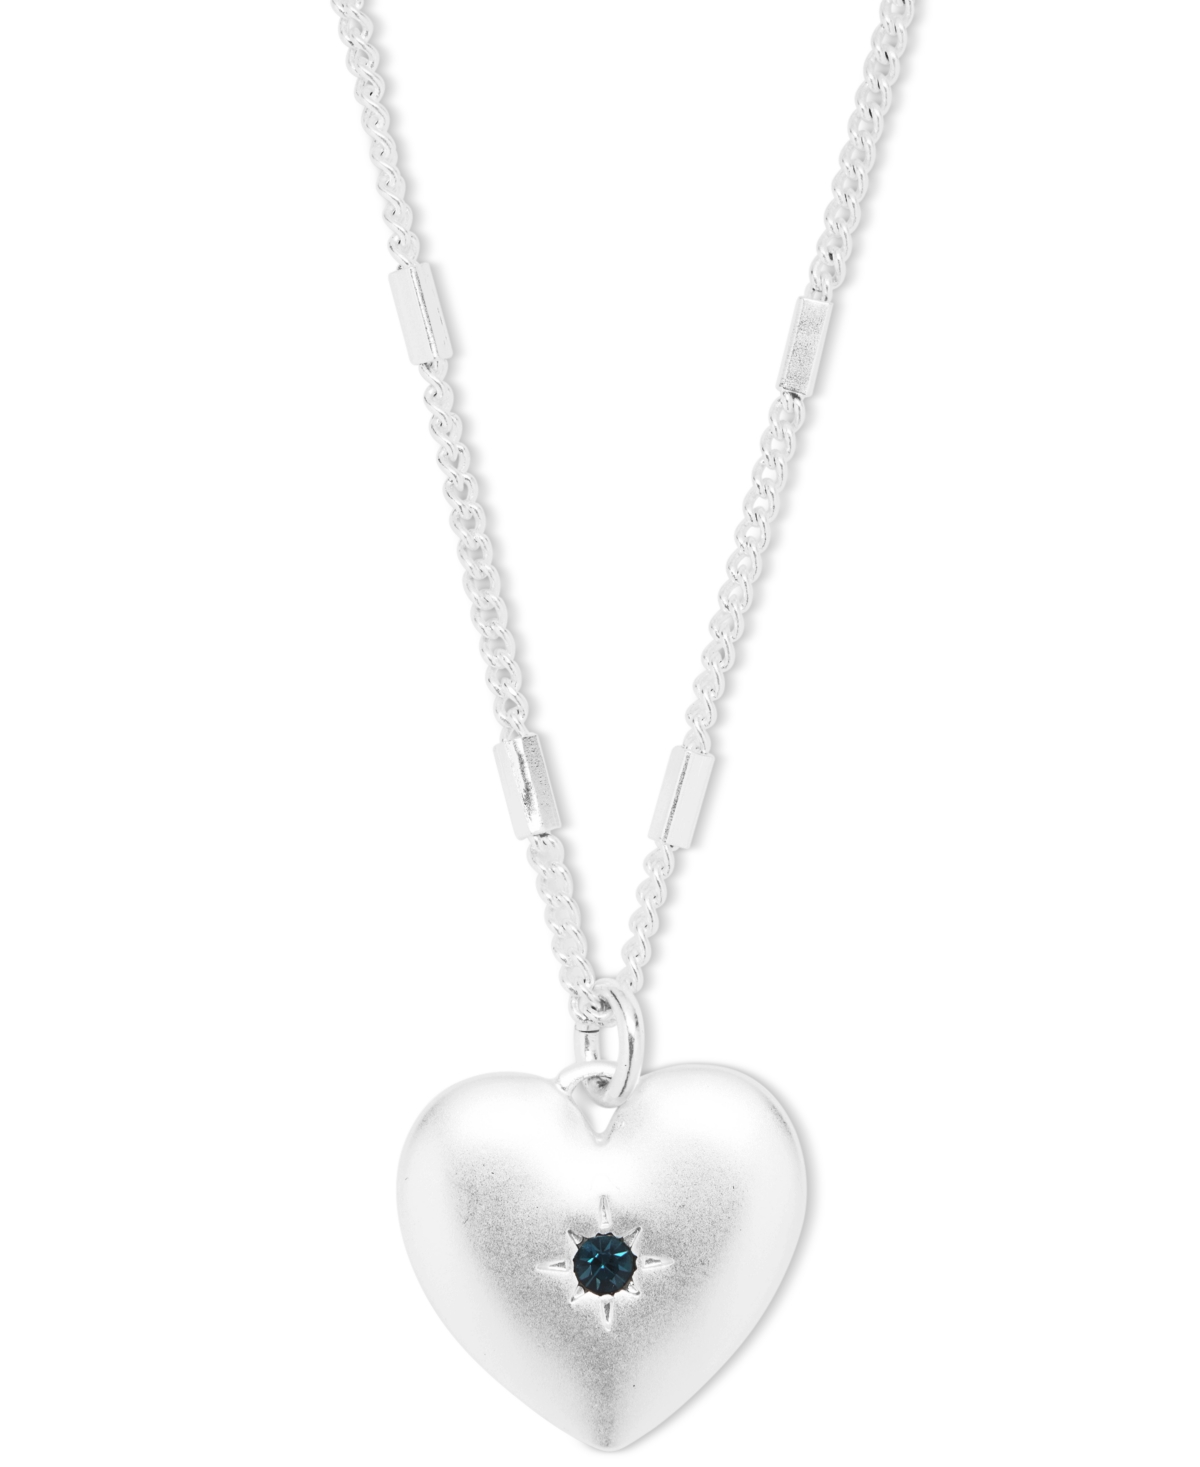 Lucky Brand Silver-tone Color Pave Heart Pendant Necklace, 16-3/4" + 2" Extender